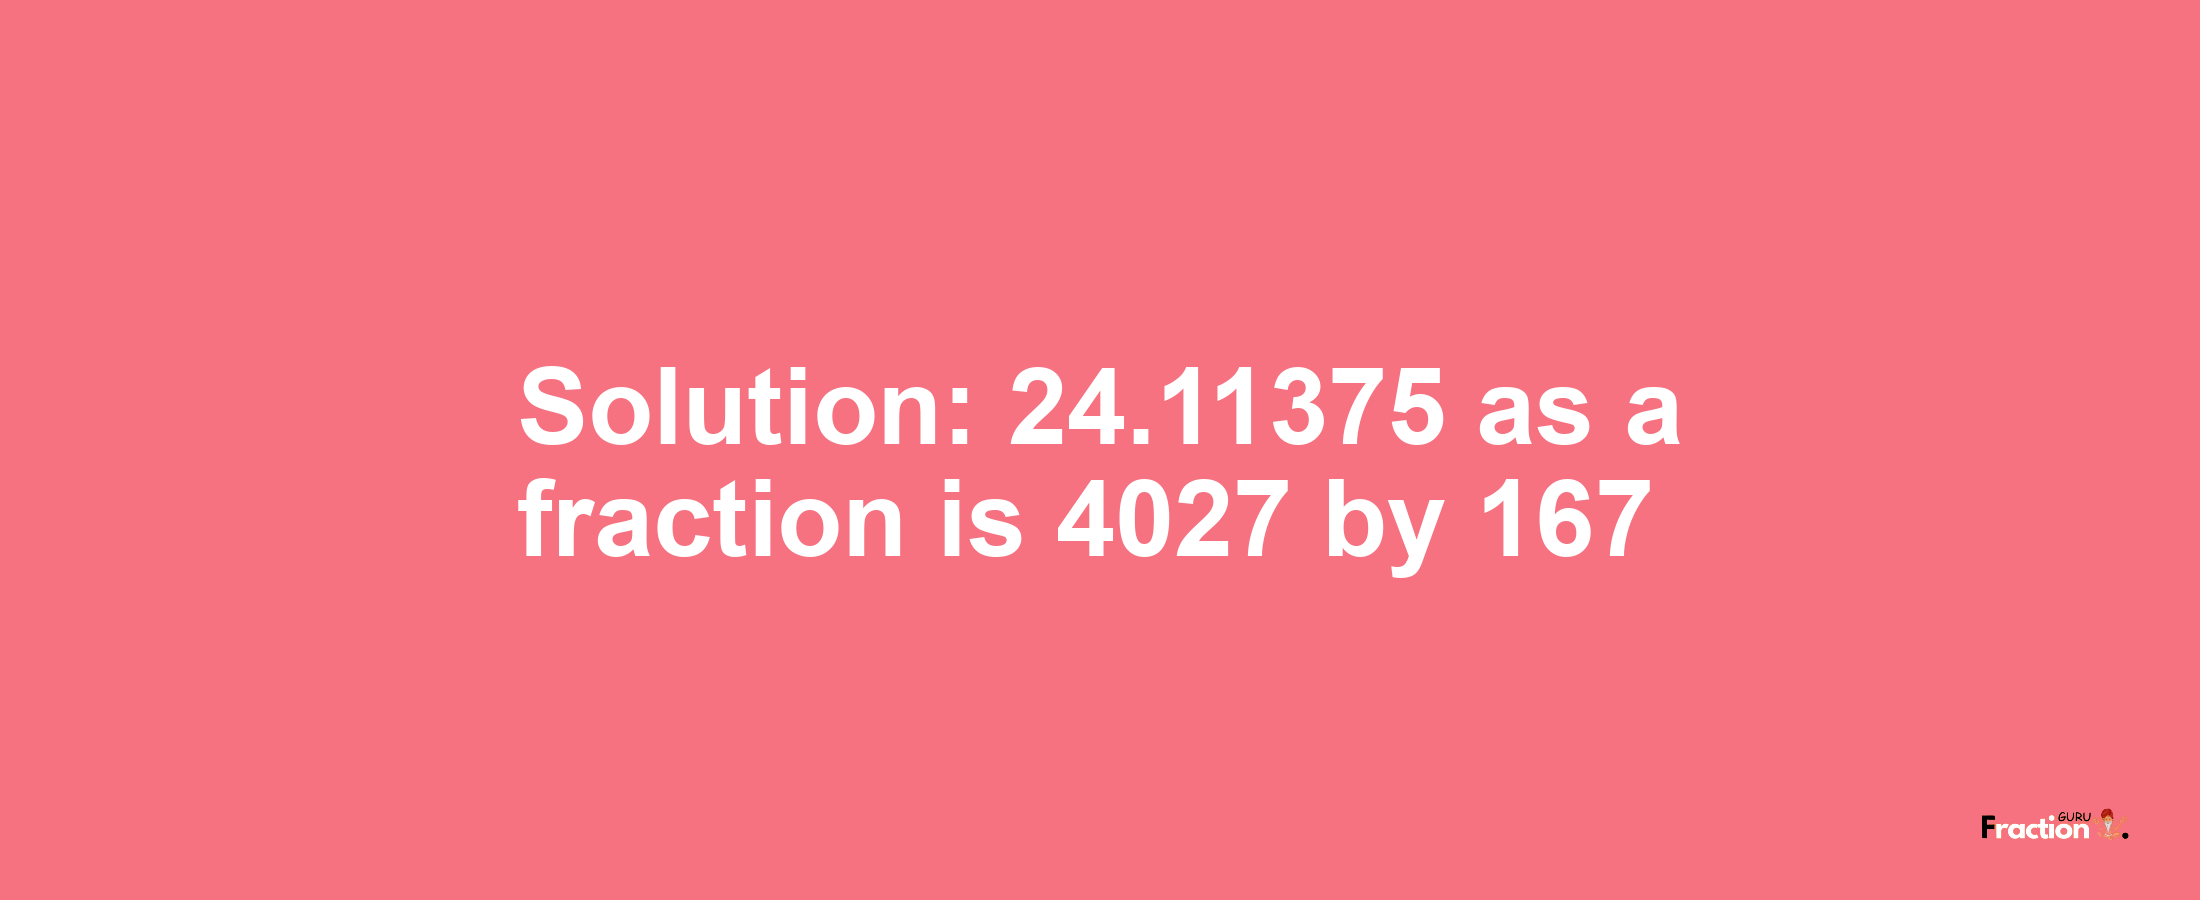 Solution:24.11375 as a fraction is 4027/167